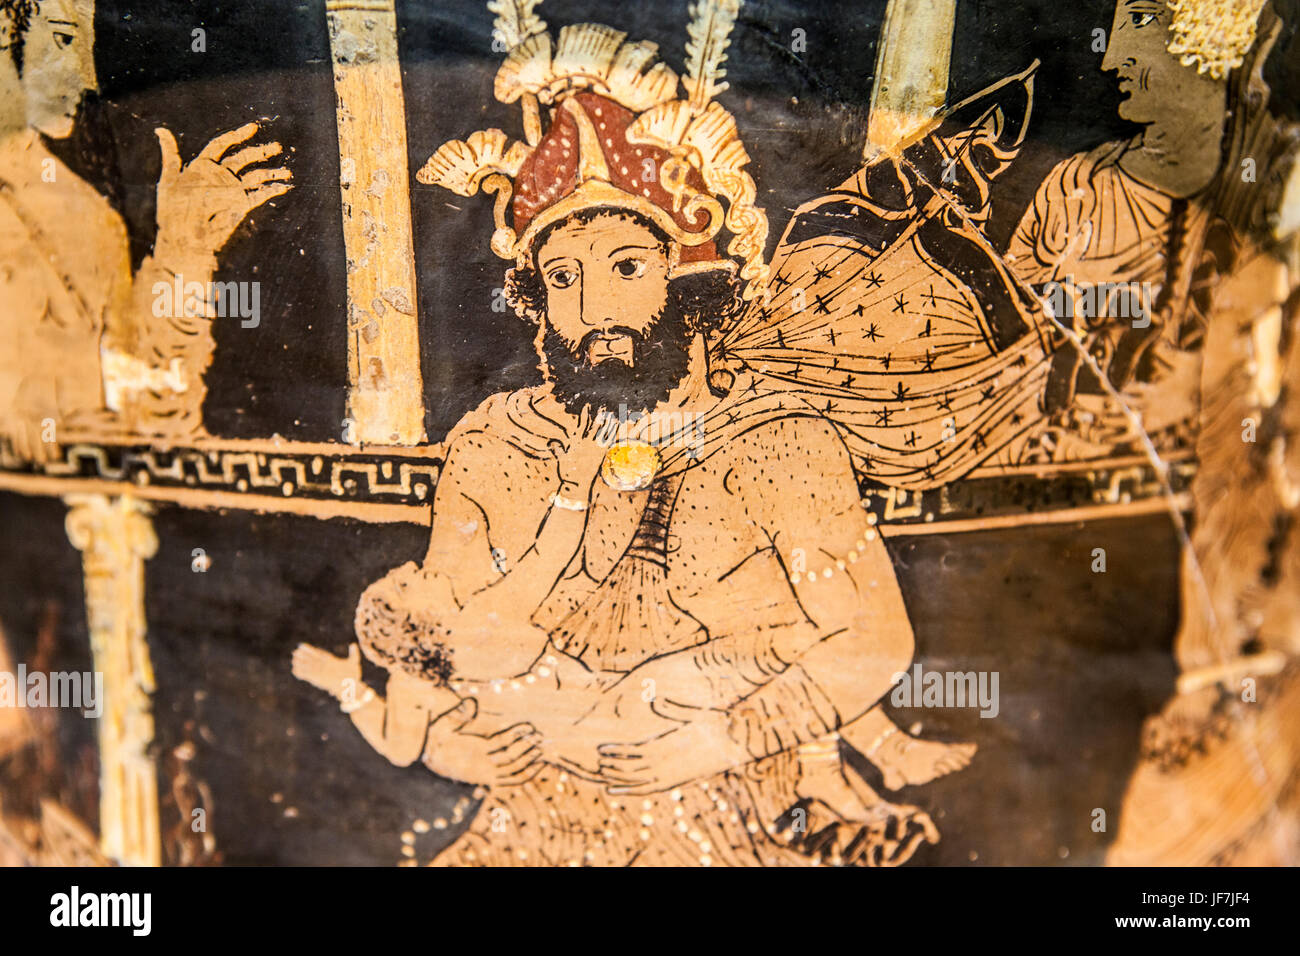 Madrid, Spain - February 24, 2017: Greek attic krater depicting Heracles insanity on theater at National Archeological  Museum of Madrid Stock Photo